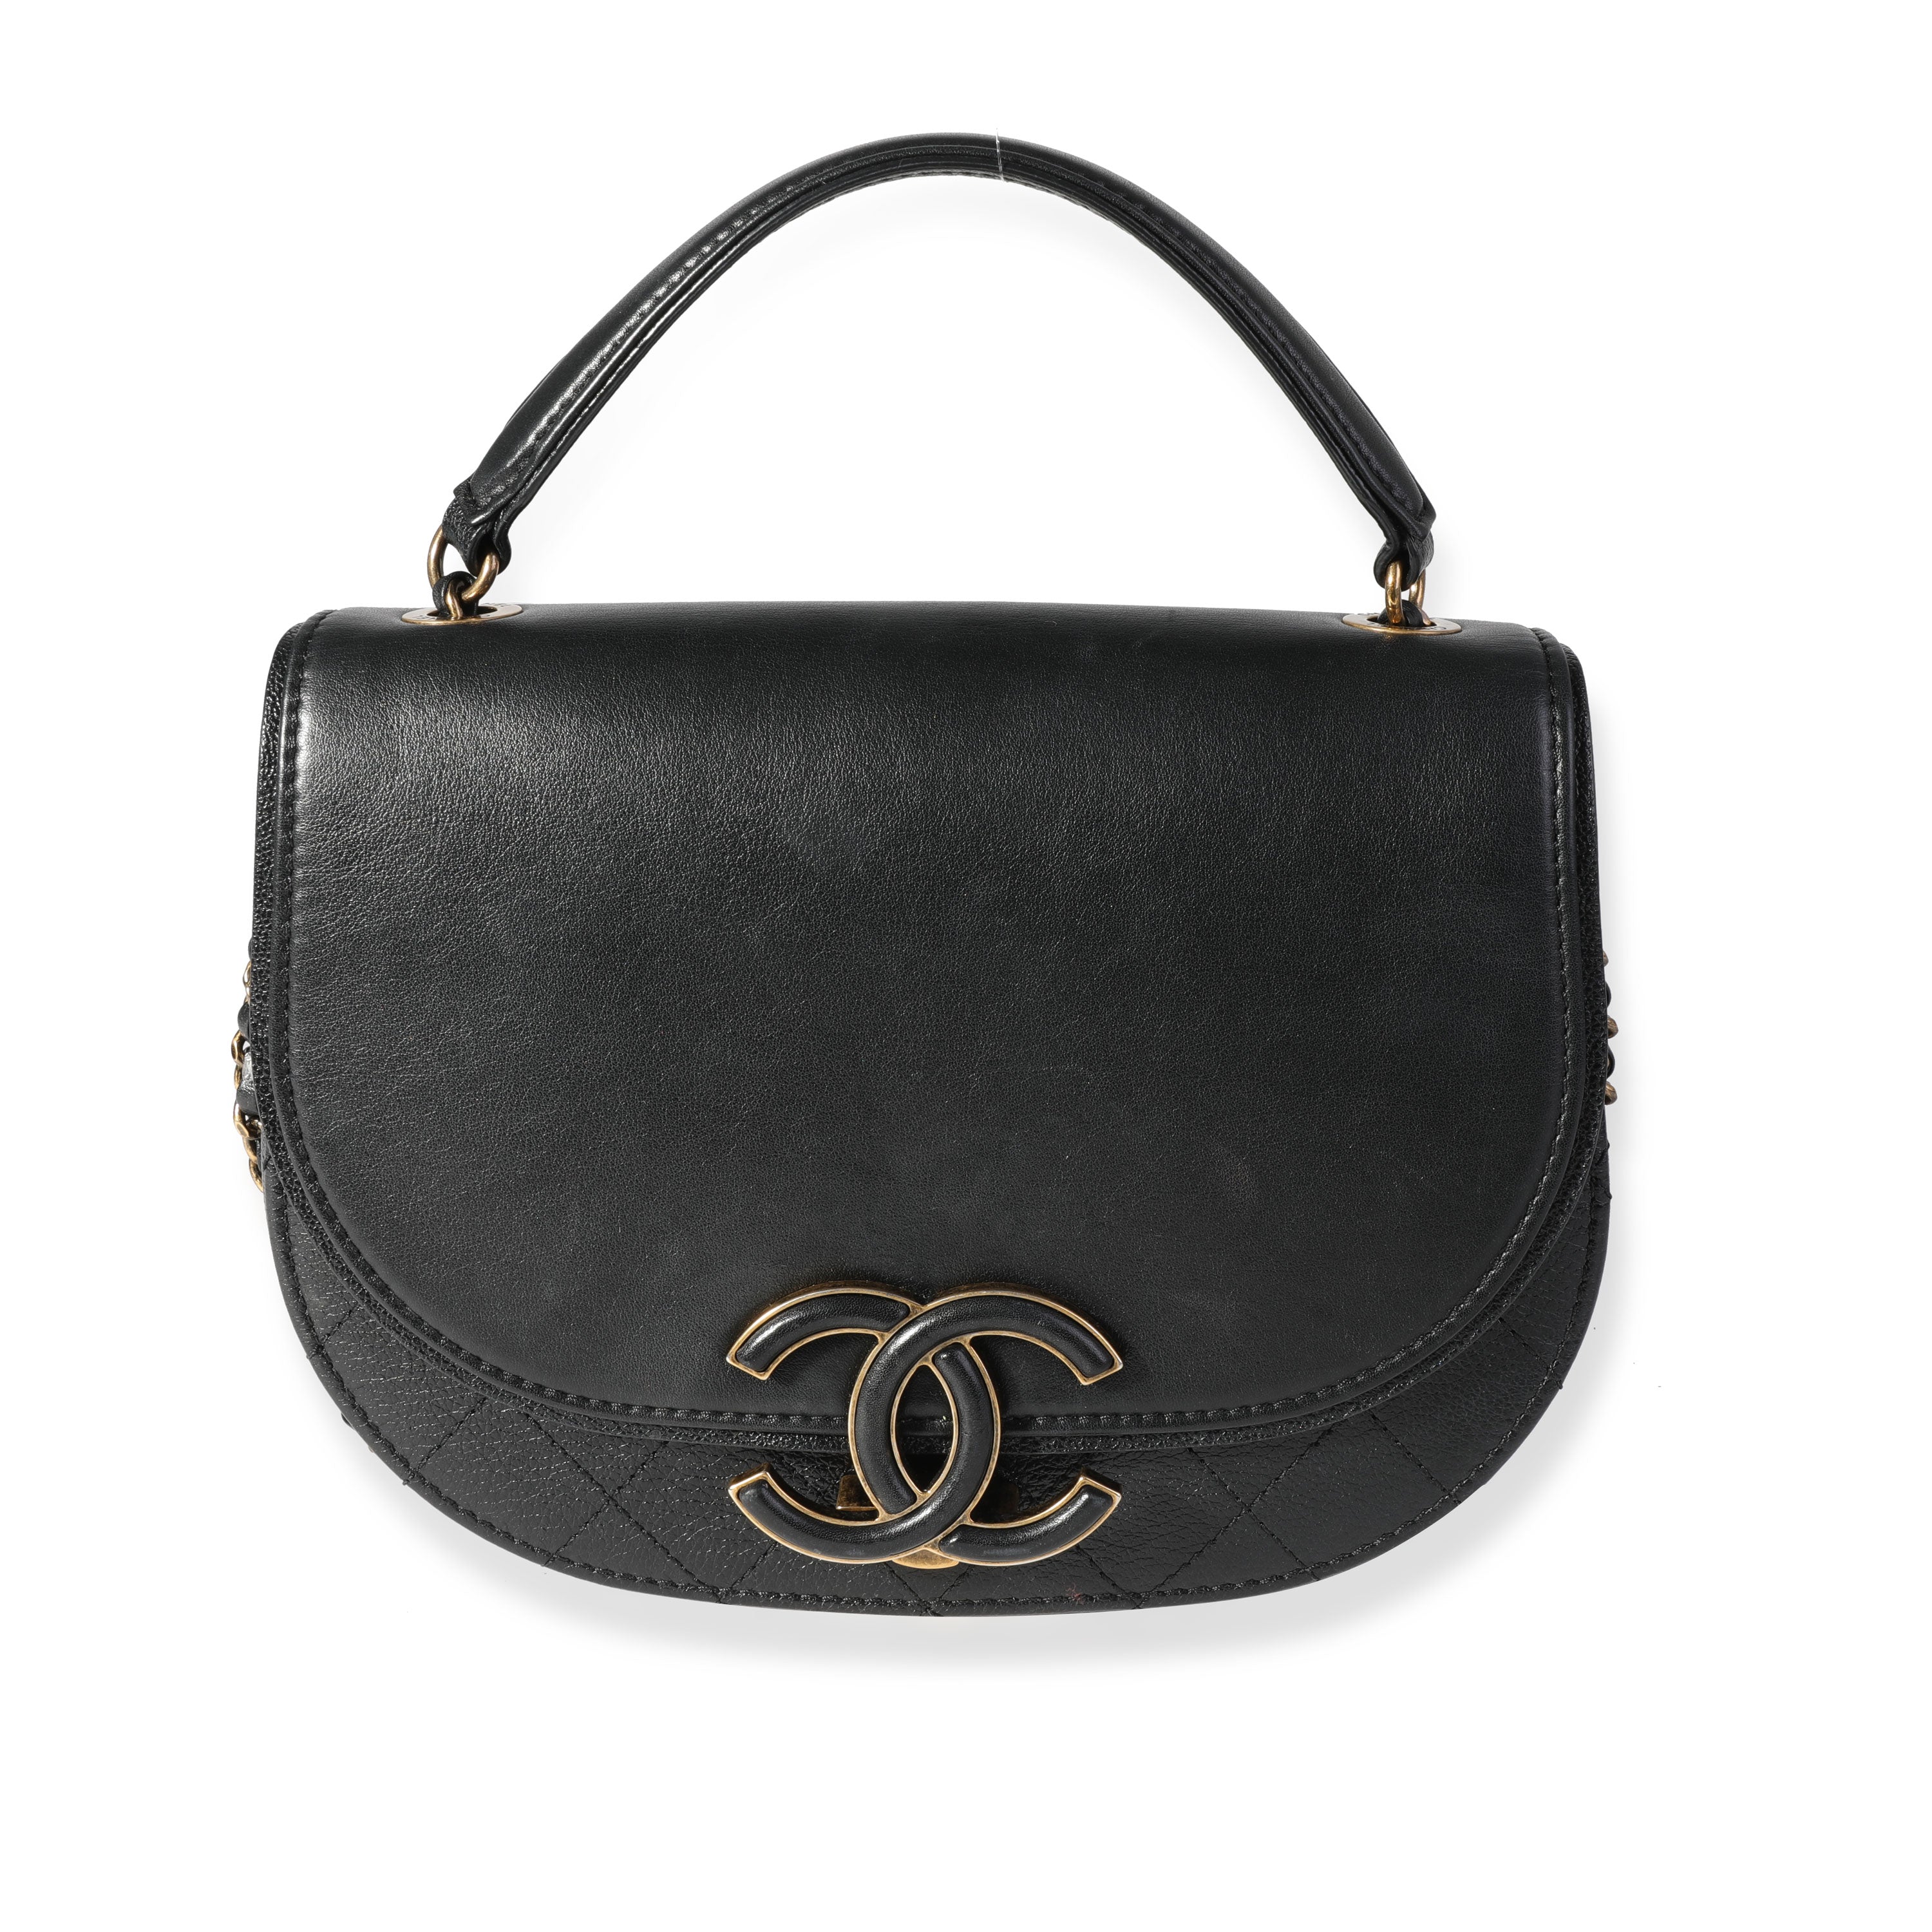 Chanel Black Quilted Calfskin Coco Curve Flap Bag, myGemma, SG